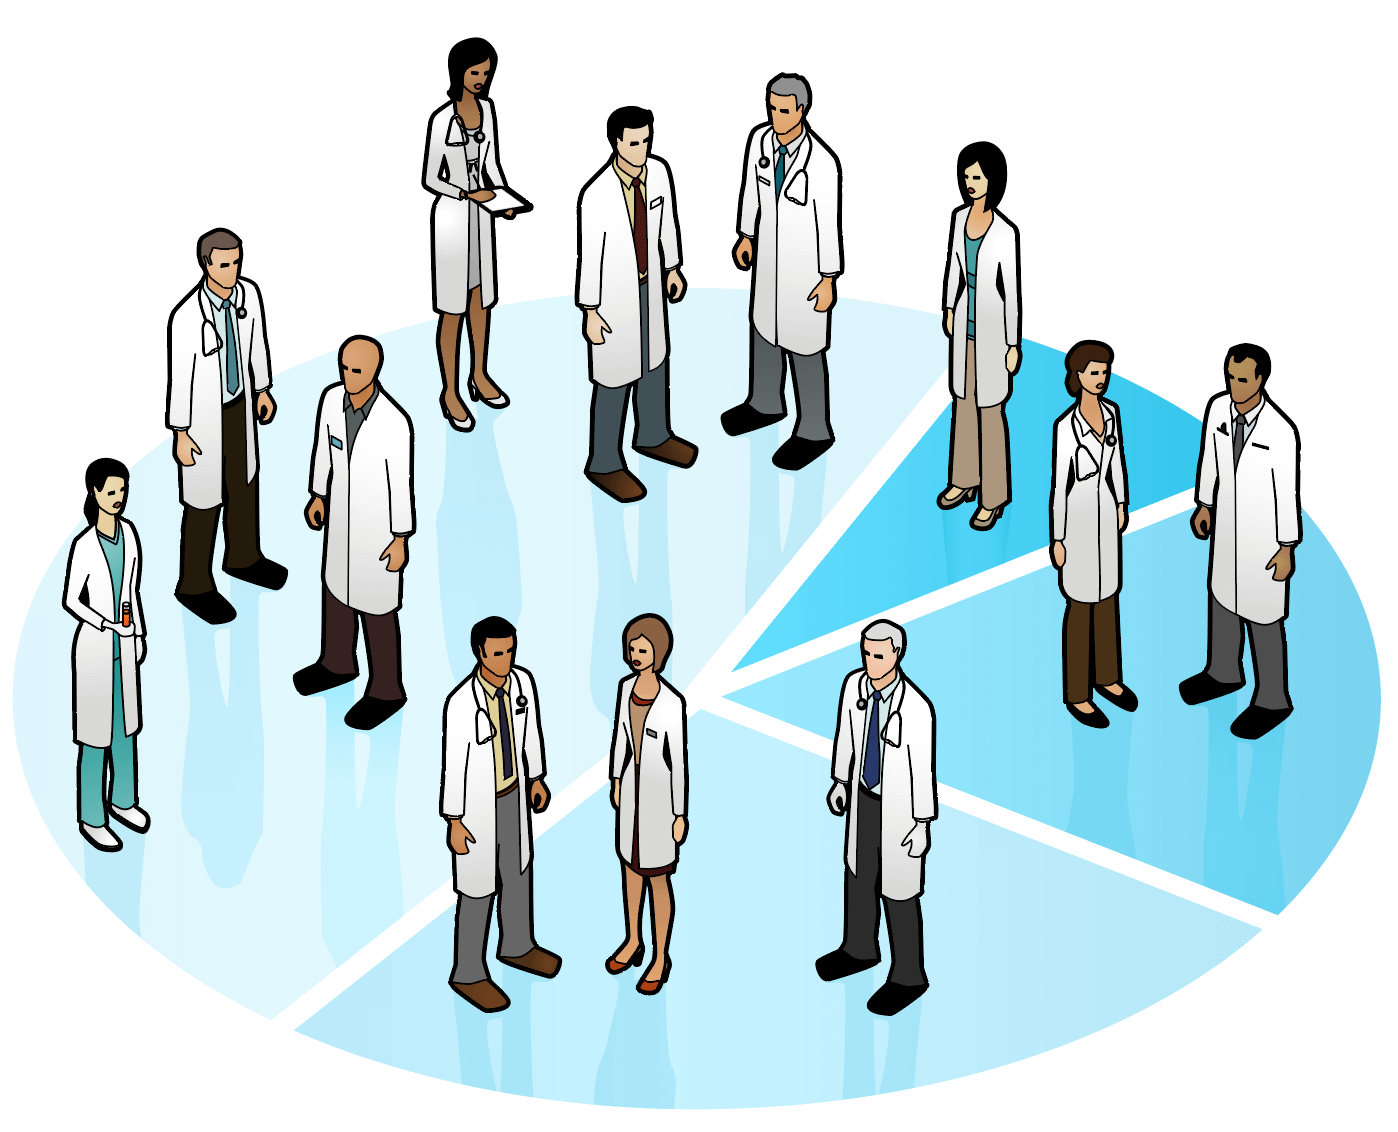 An illustration of a group of healthcare providers standing on a pie chart.